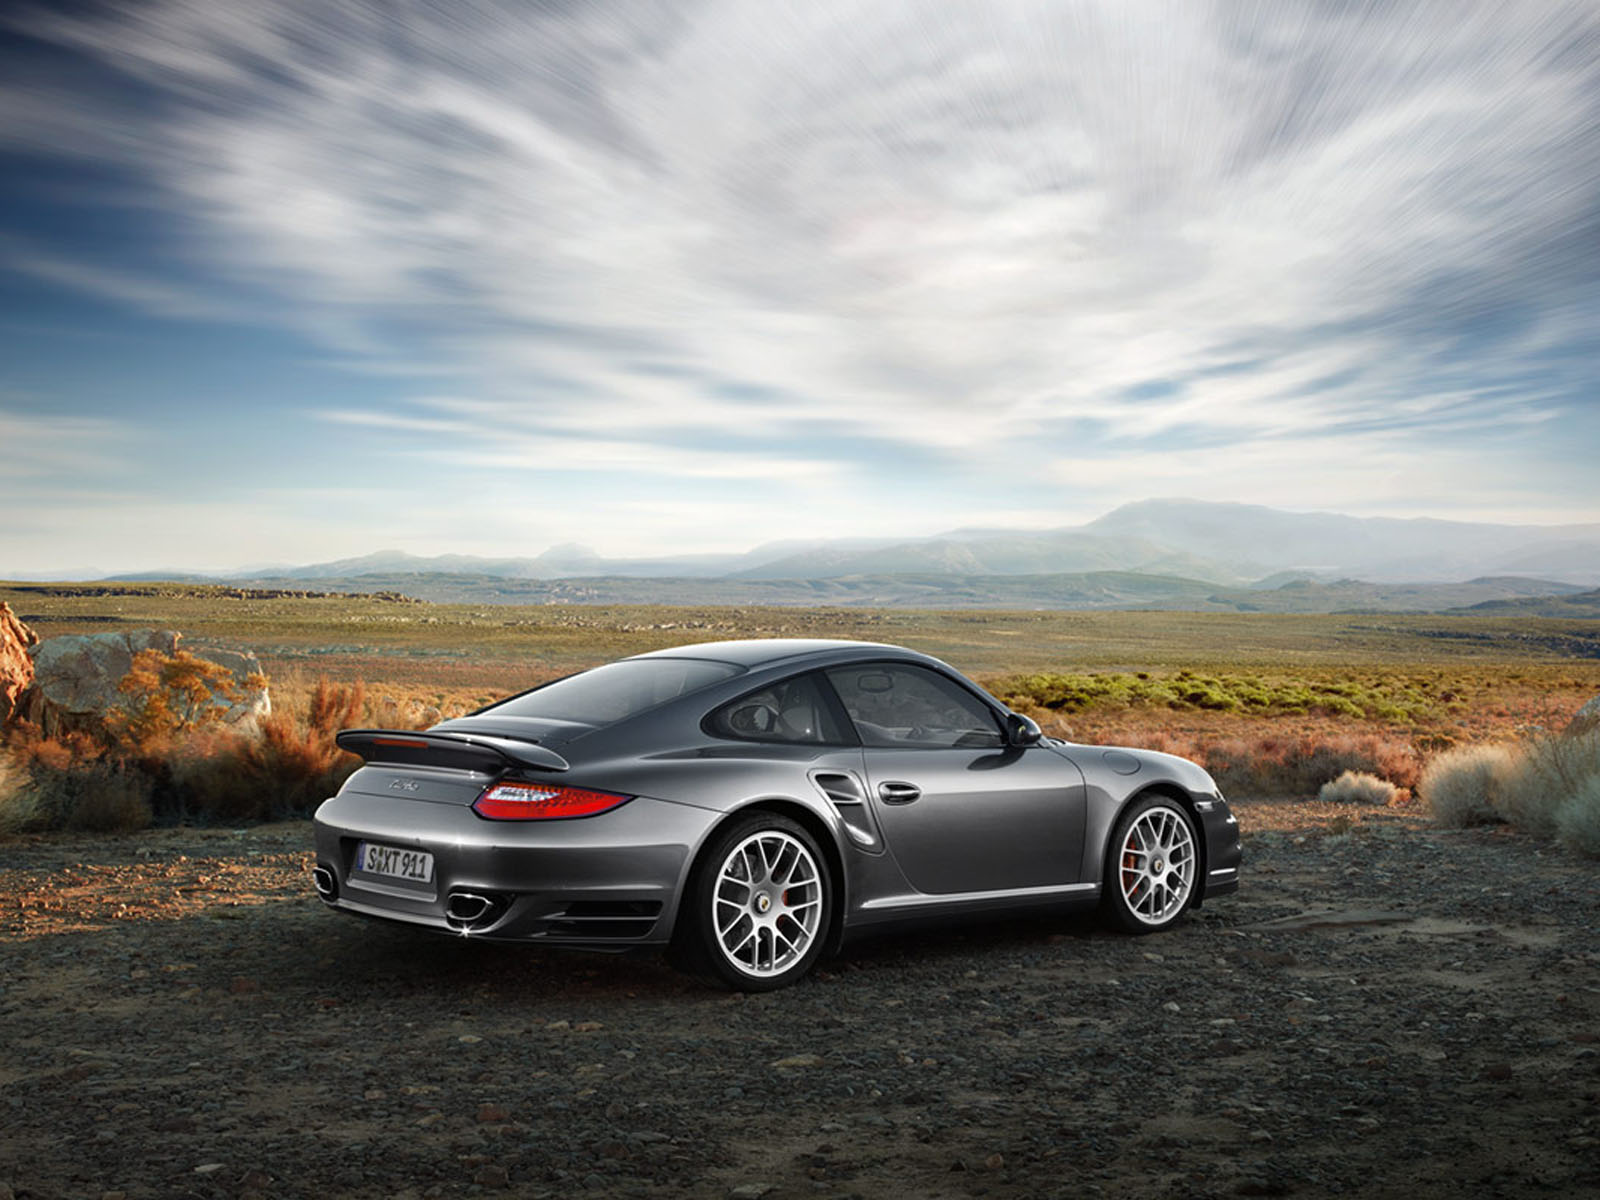 Tag Porsche Turbo Car Wallpaper Background Photos Image And